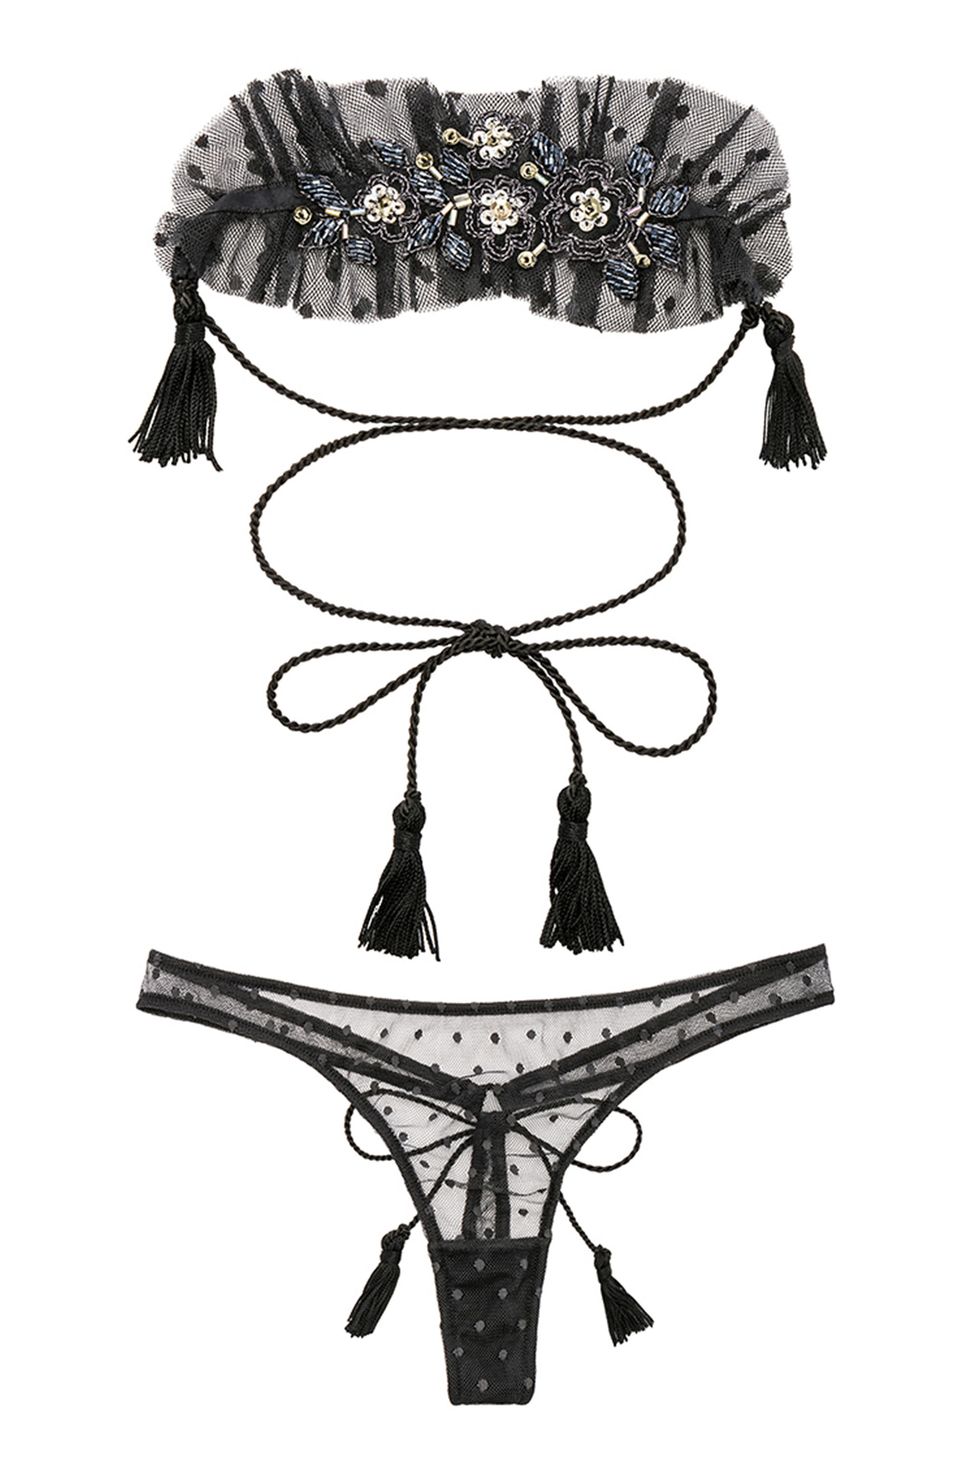 Lingerie shop emblem with lace bra and pants drawn in retro style